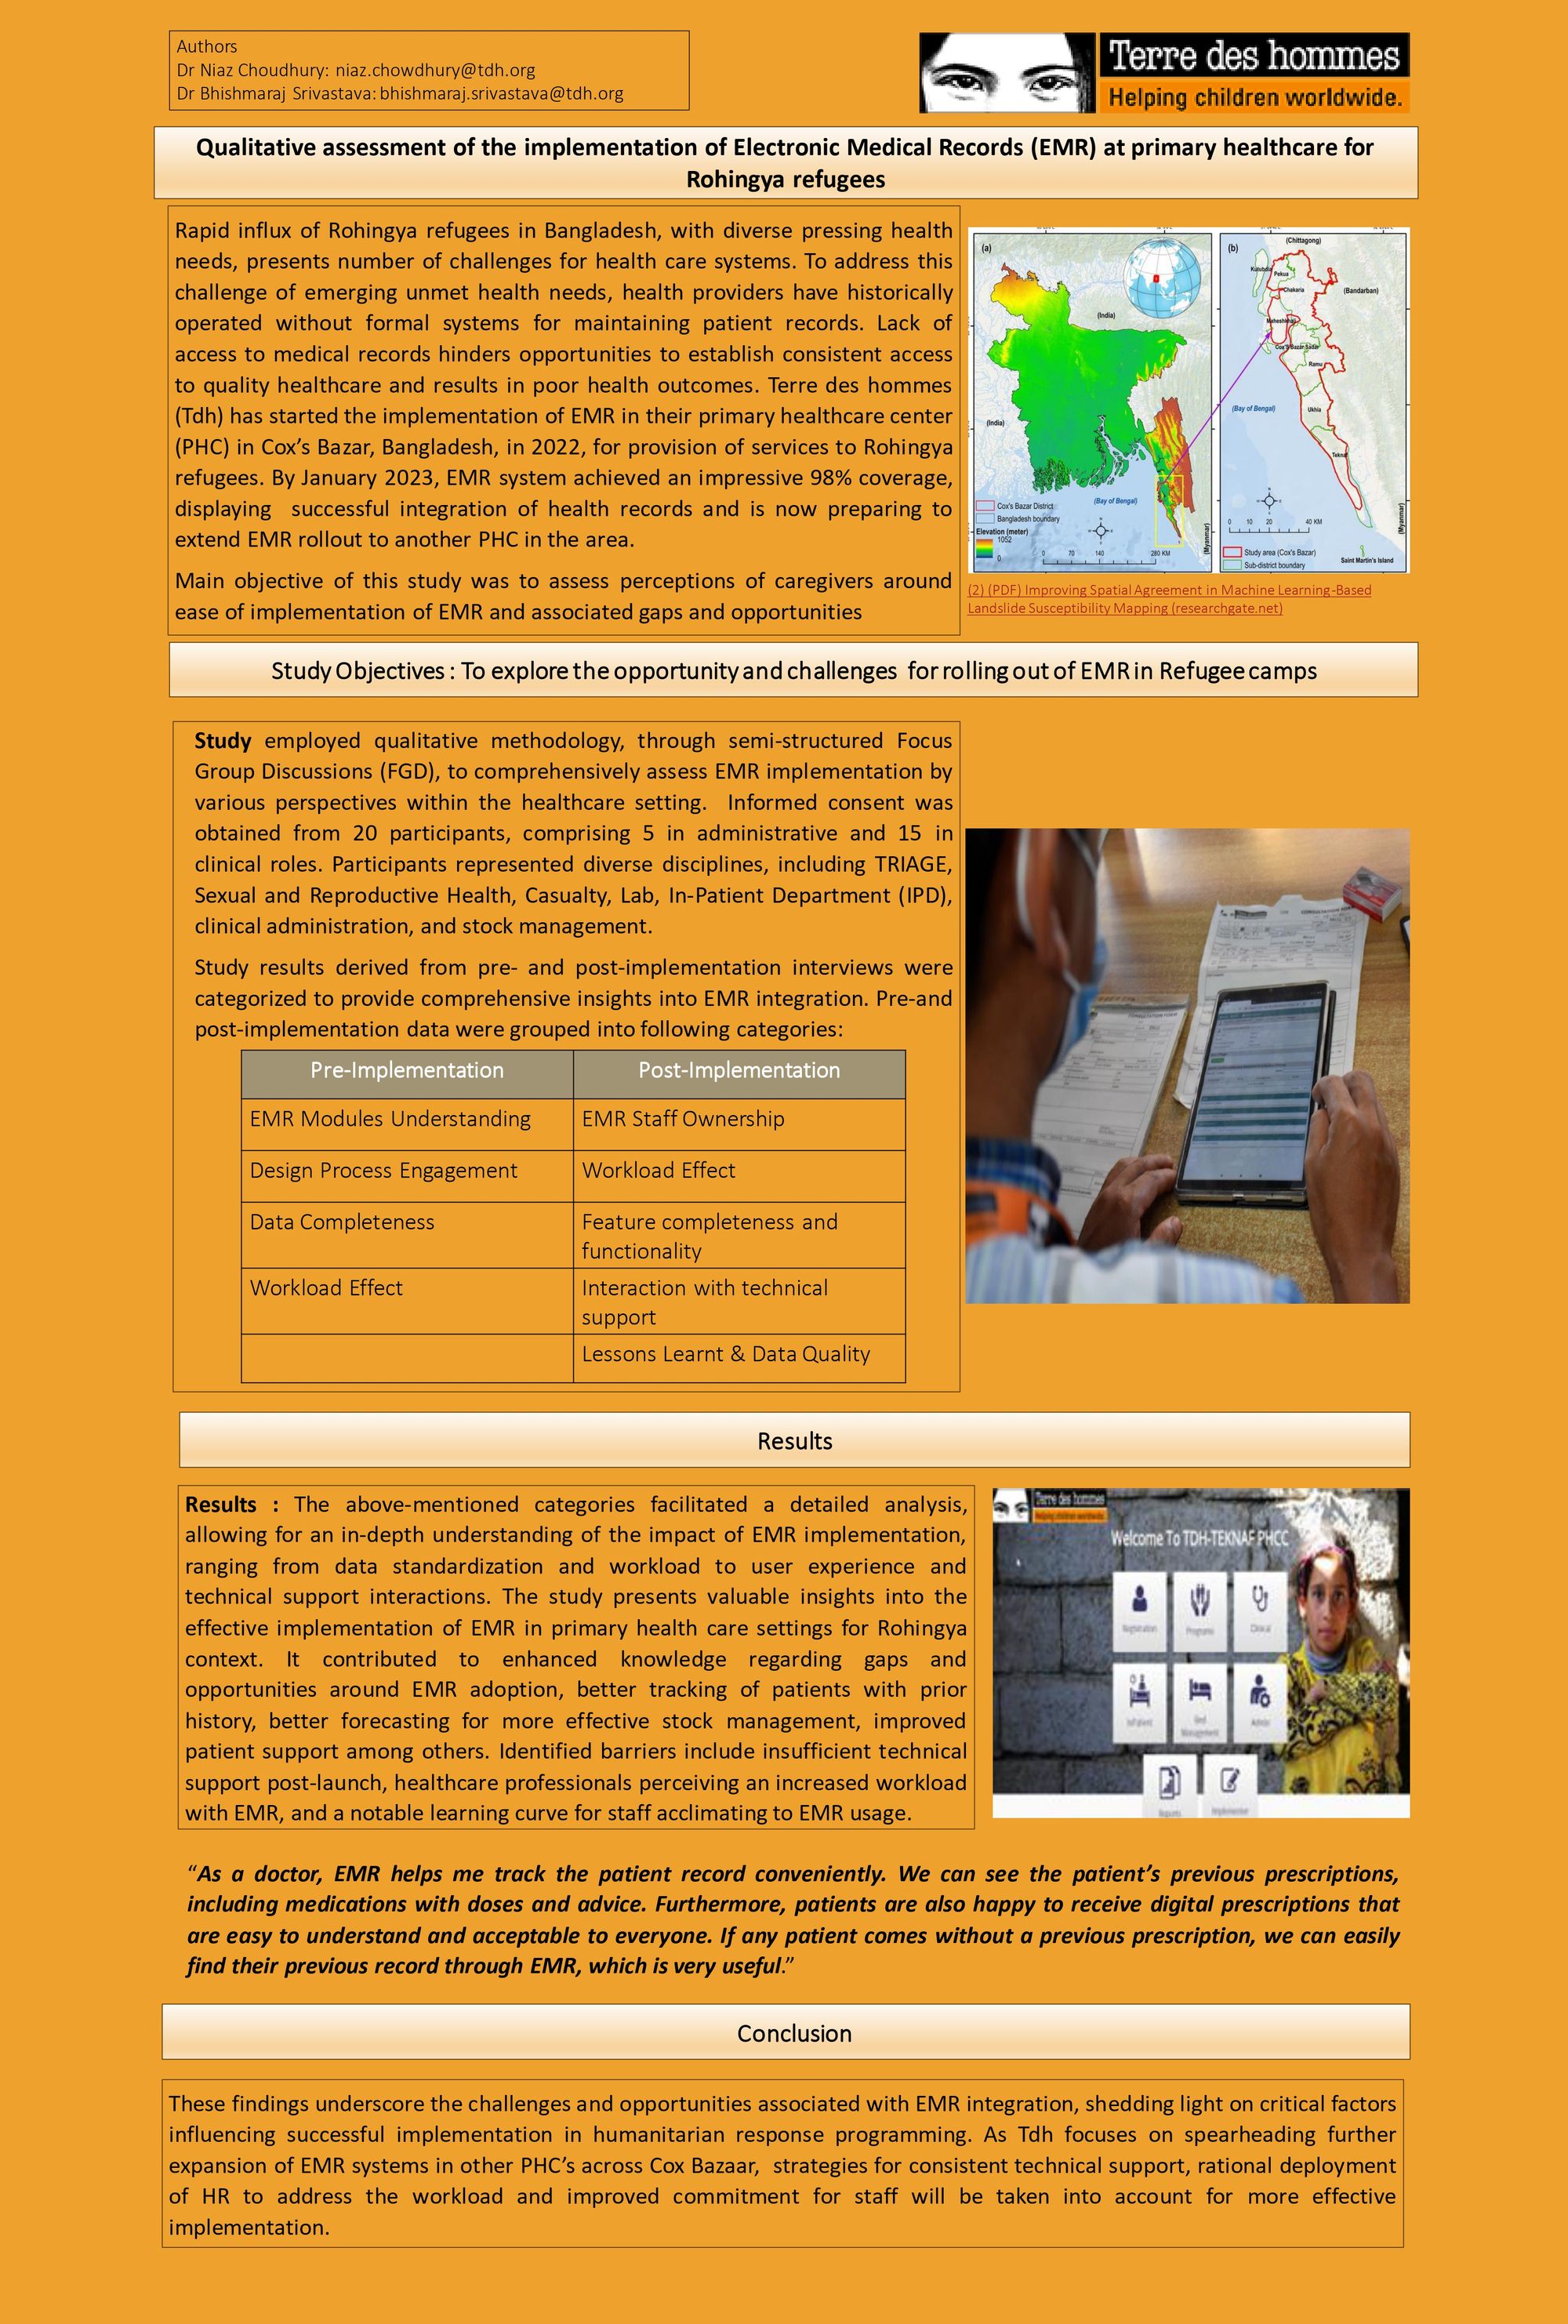 Qualitative Assessment of the implementation of Electronic Medical Record (EMR) at primary healthcare for Rohingya Refugees